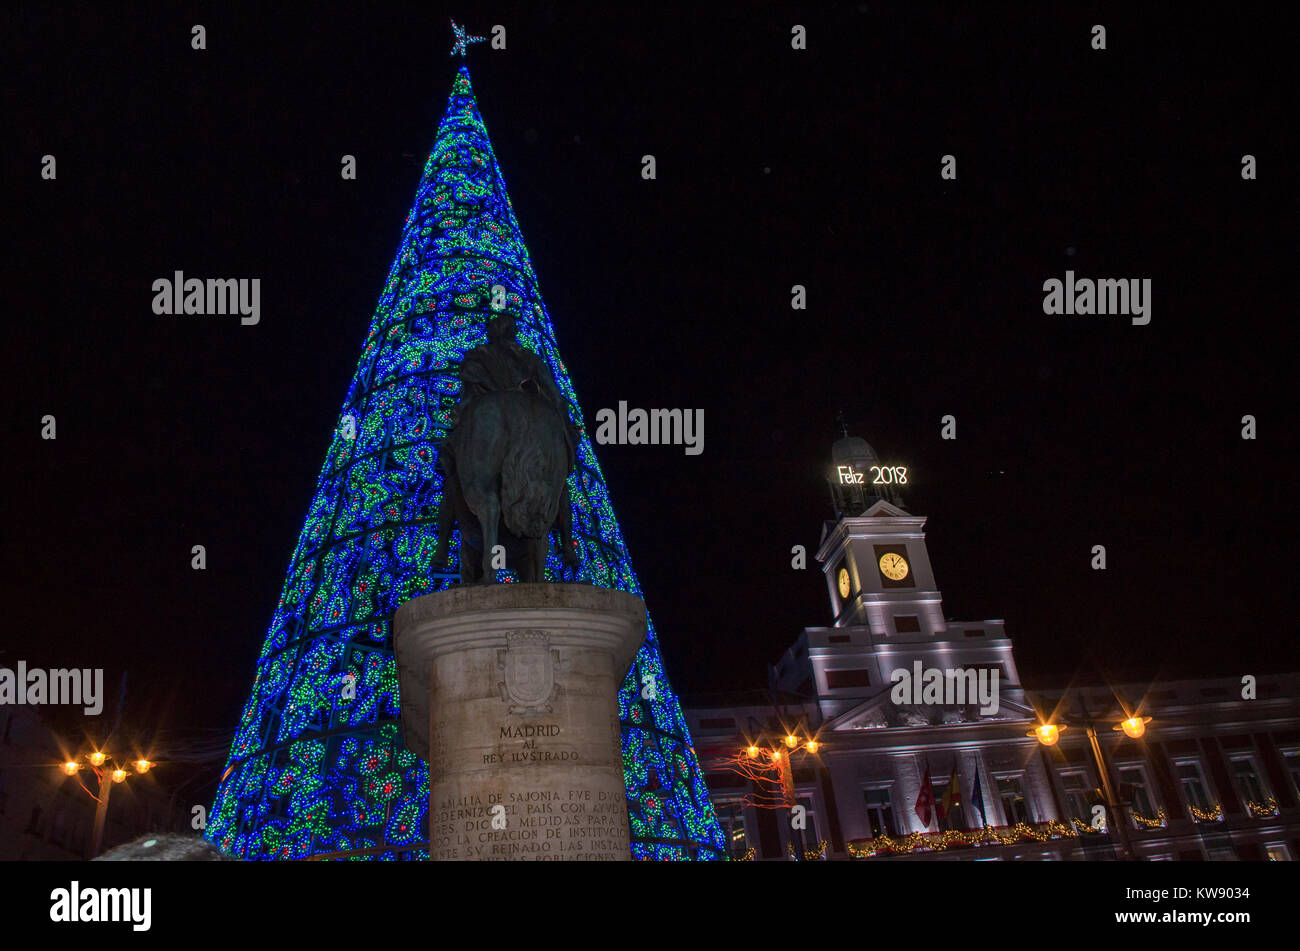 Madrid, Spain. 31st Dec, 2017. Thousands of people gathered at the central square of Madrid Puerta del Sol to welcome the new year and have the traitional 12 lucky grapes. Credit: Lora Grigorova/Alamy Live News Stock Photo